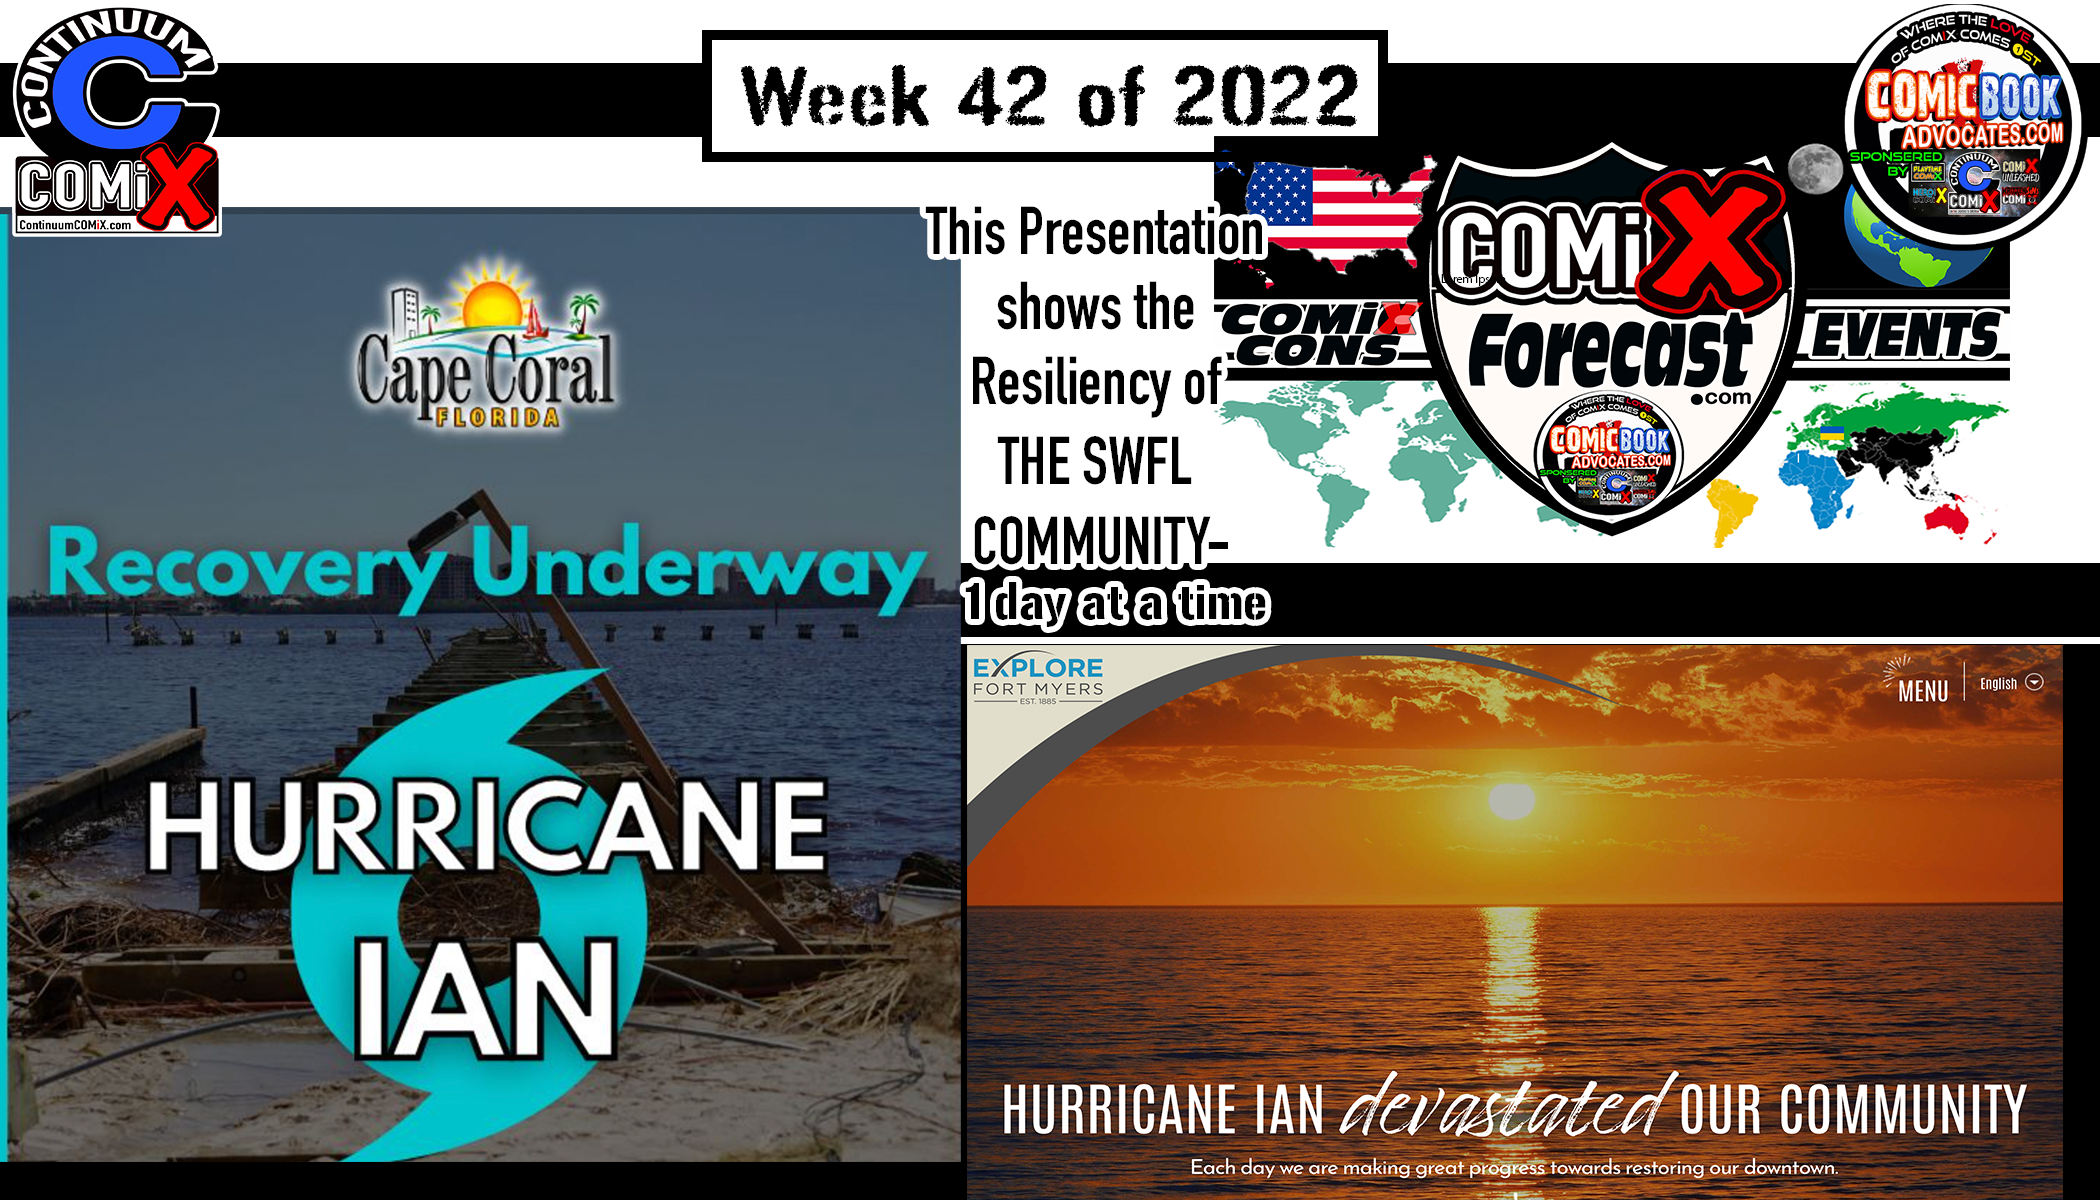 COMiX FORECAST for wk44of22- Brought to you by The STRENGTH of SWFL